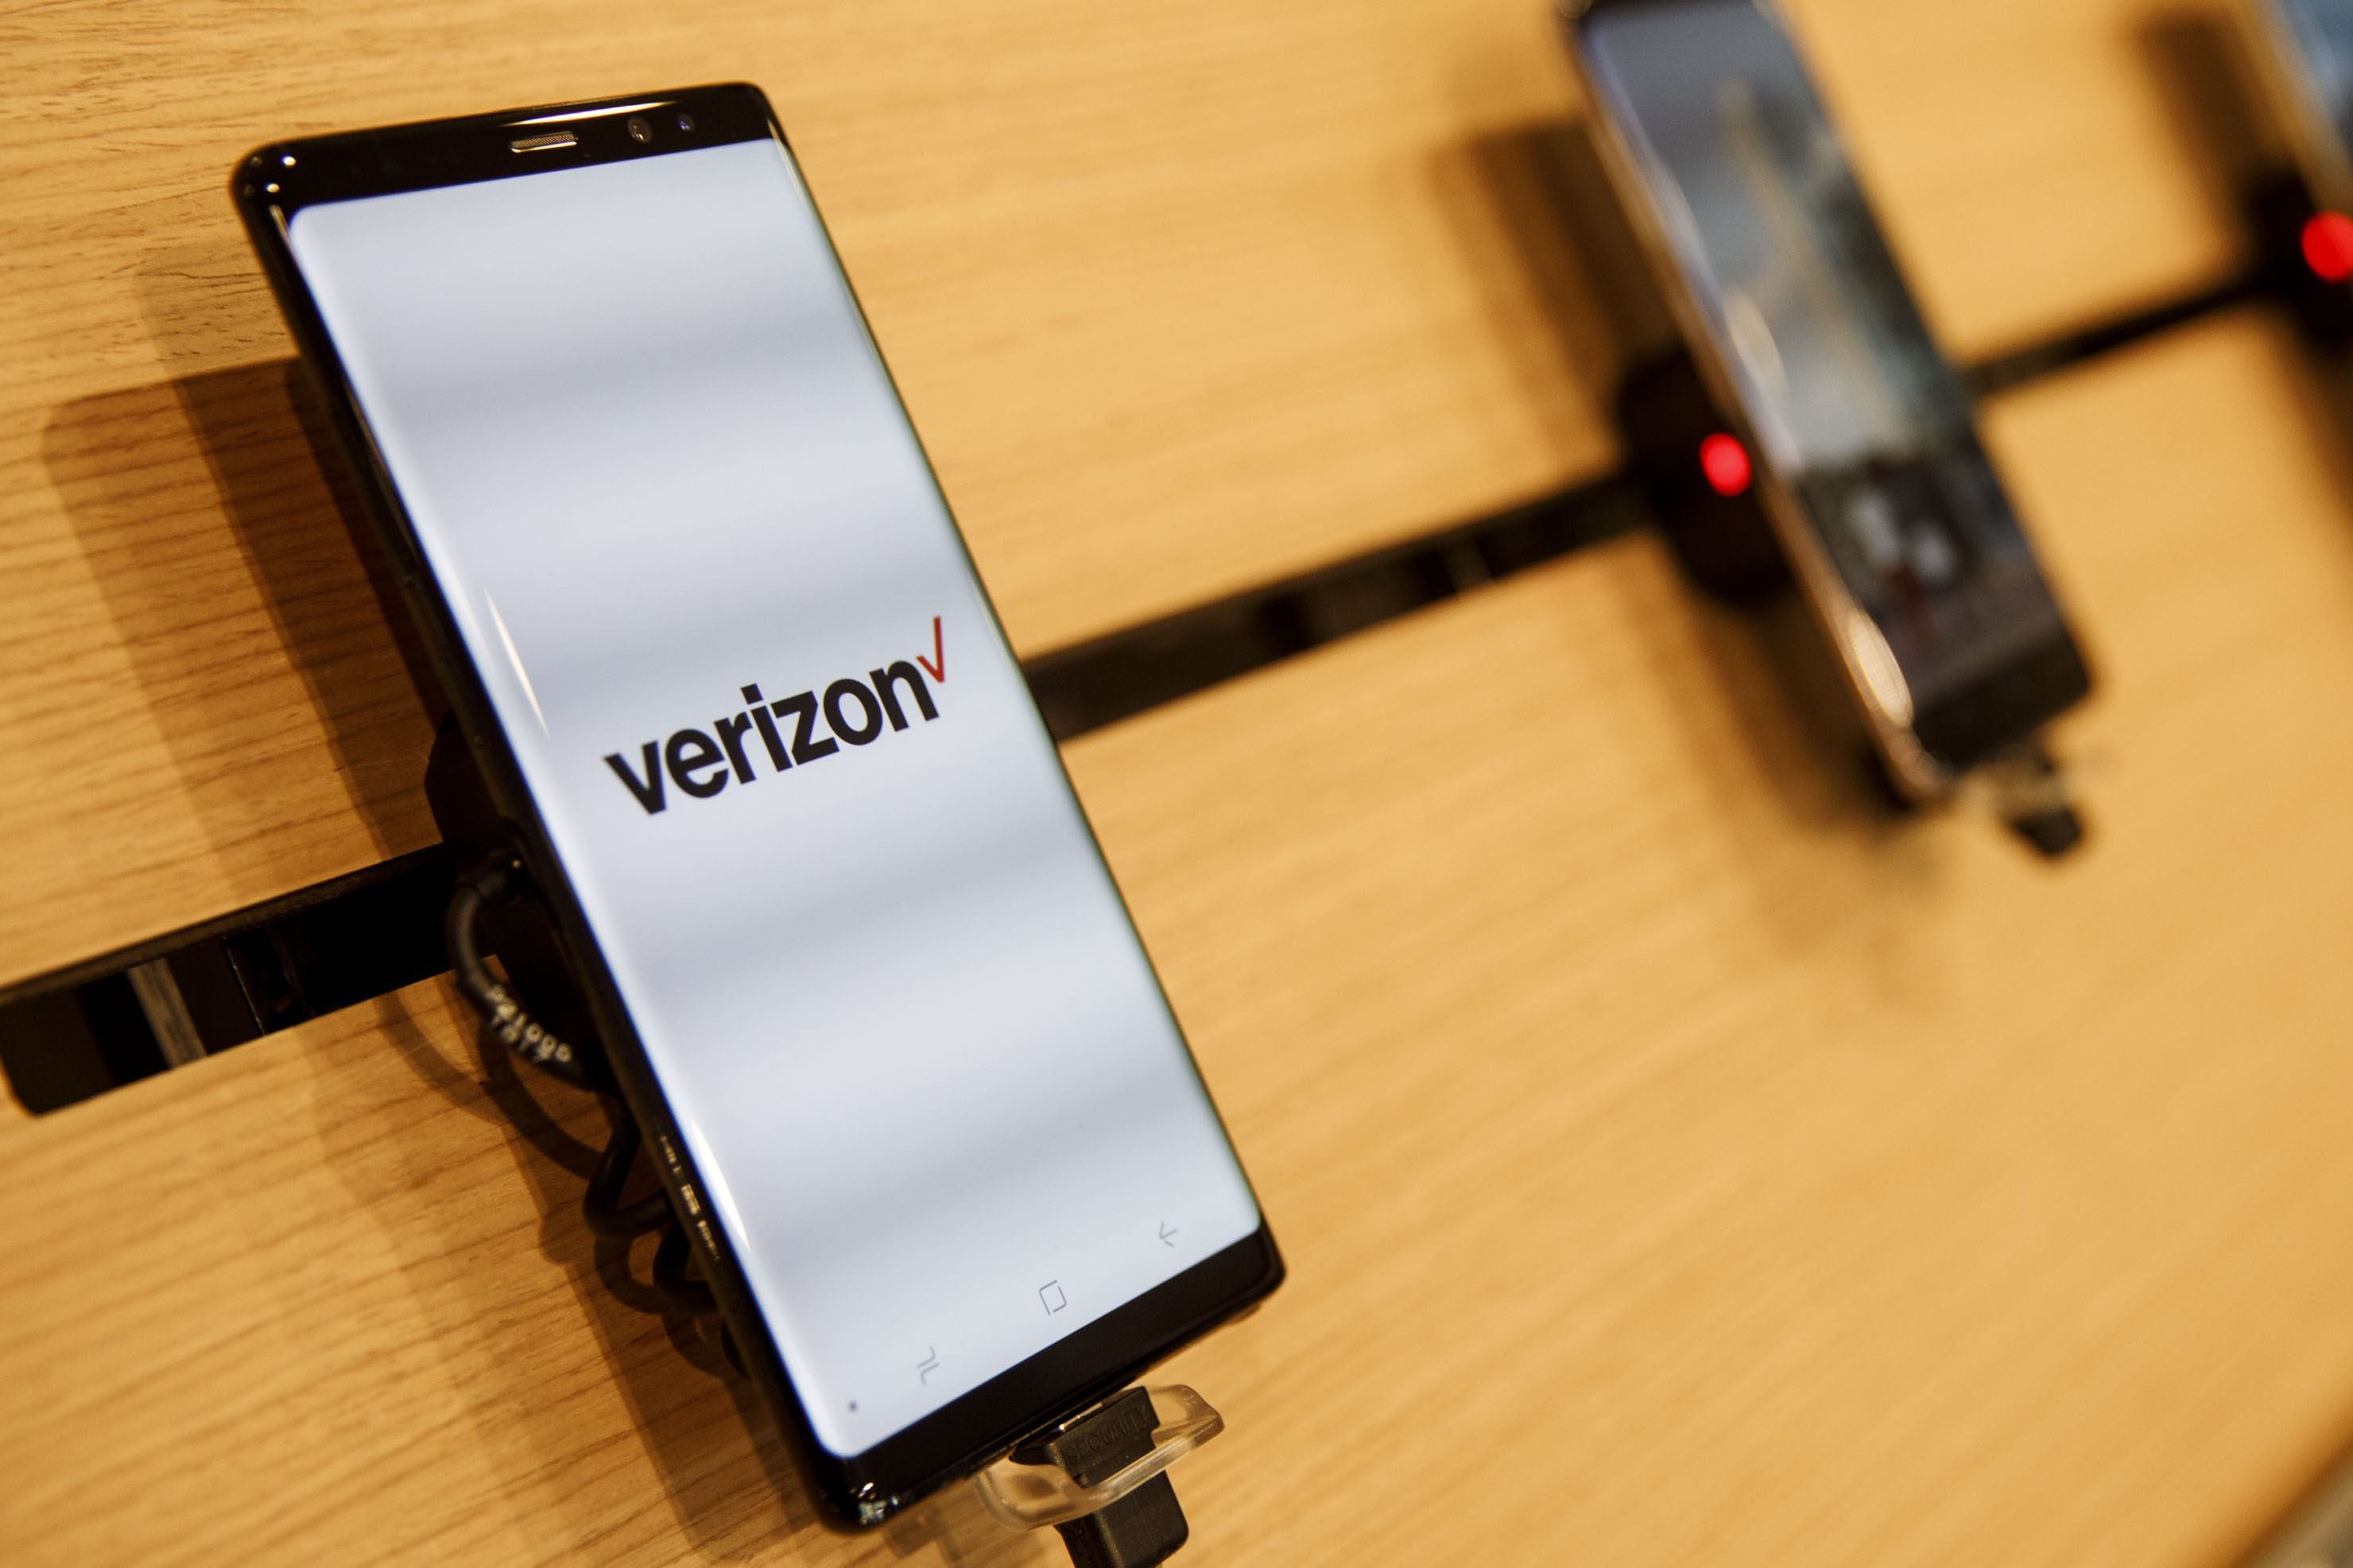 Compatibility Issues: AT&T SIM Card In A Verizon Phone